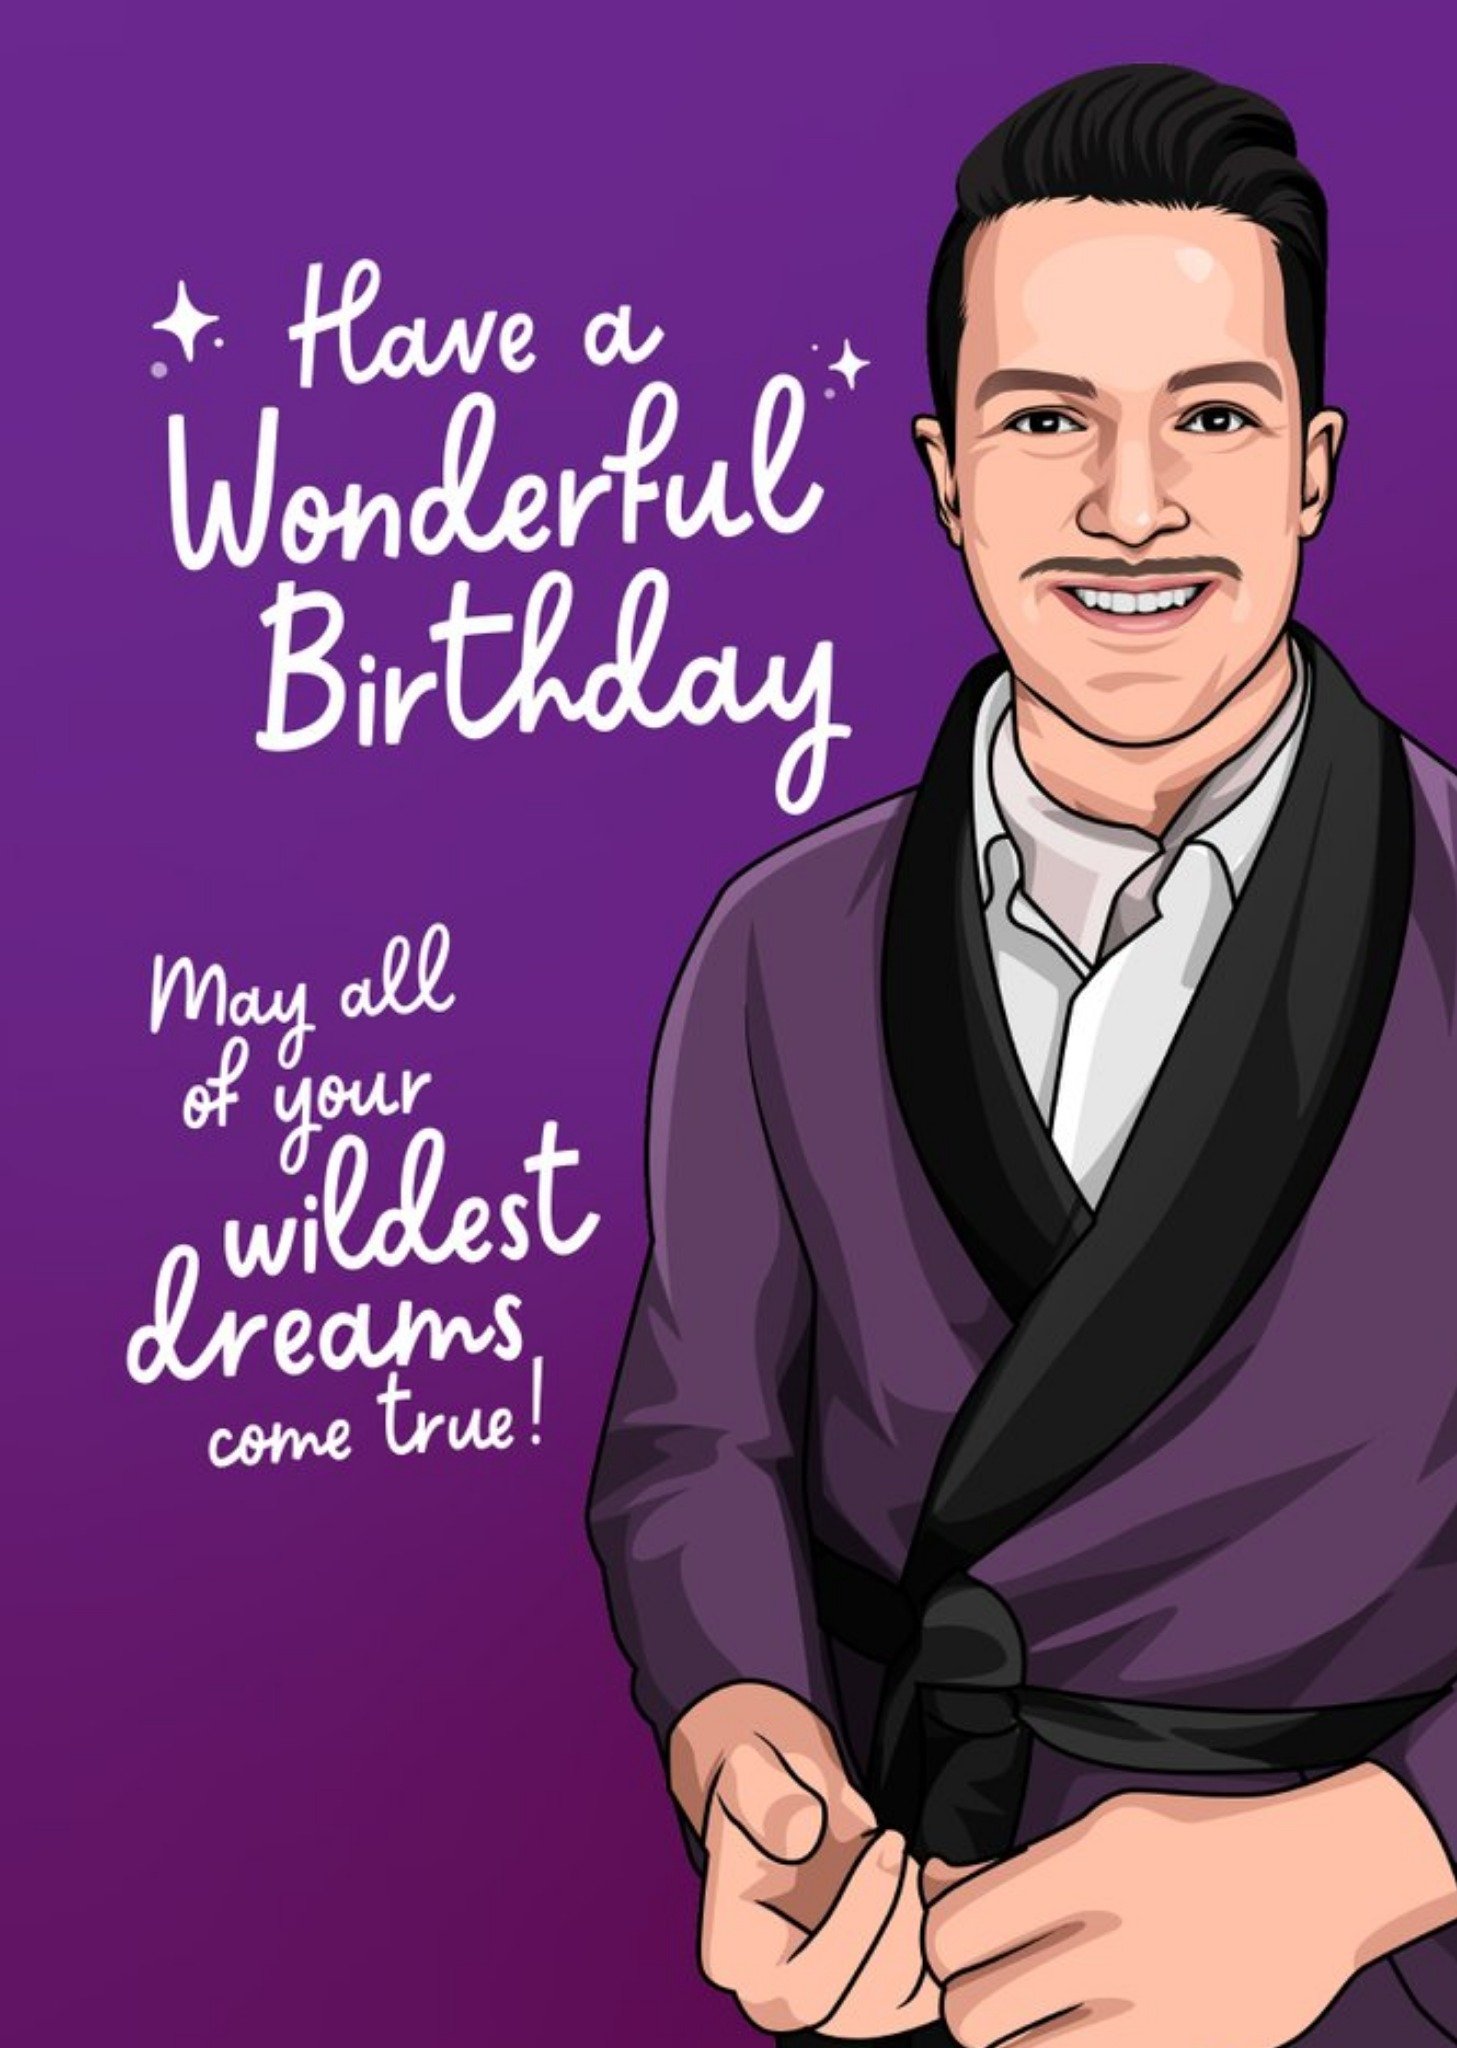 All Things Banter May All Your Wildest Dreams Come True Birthday Card, Large